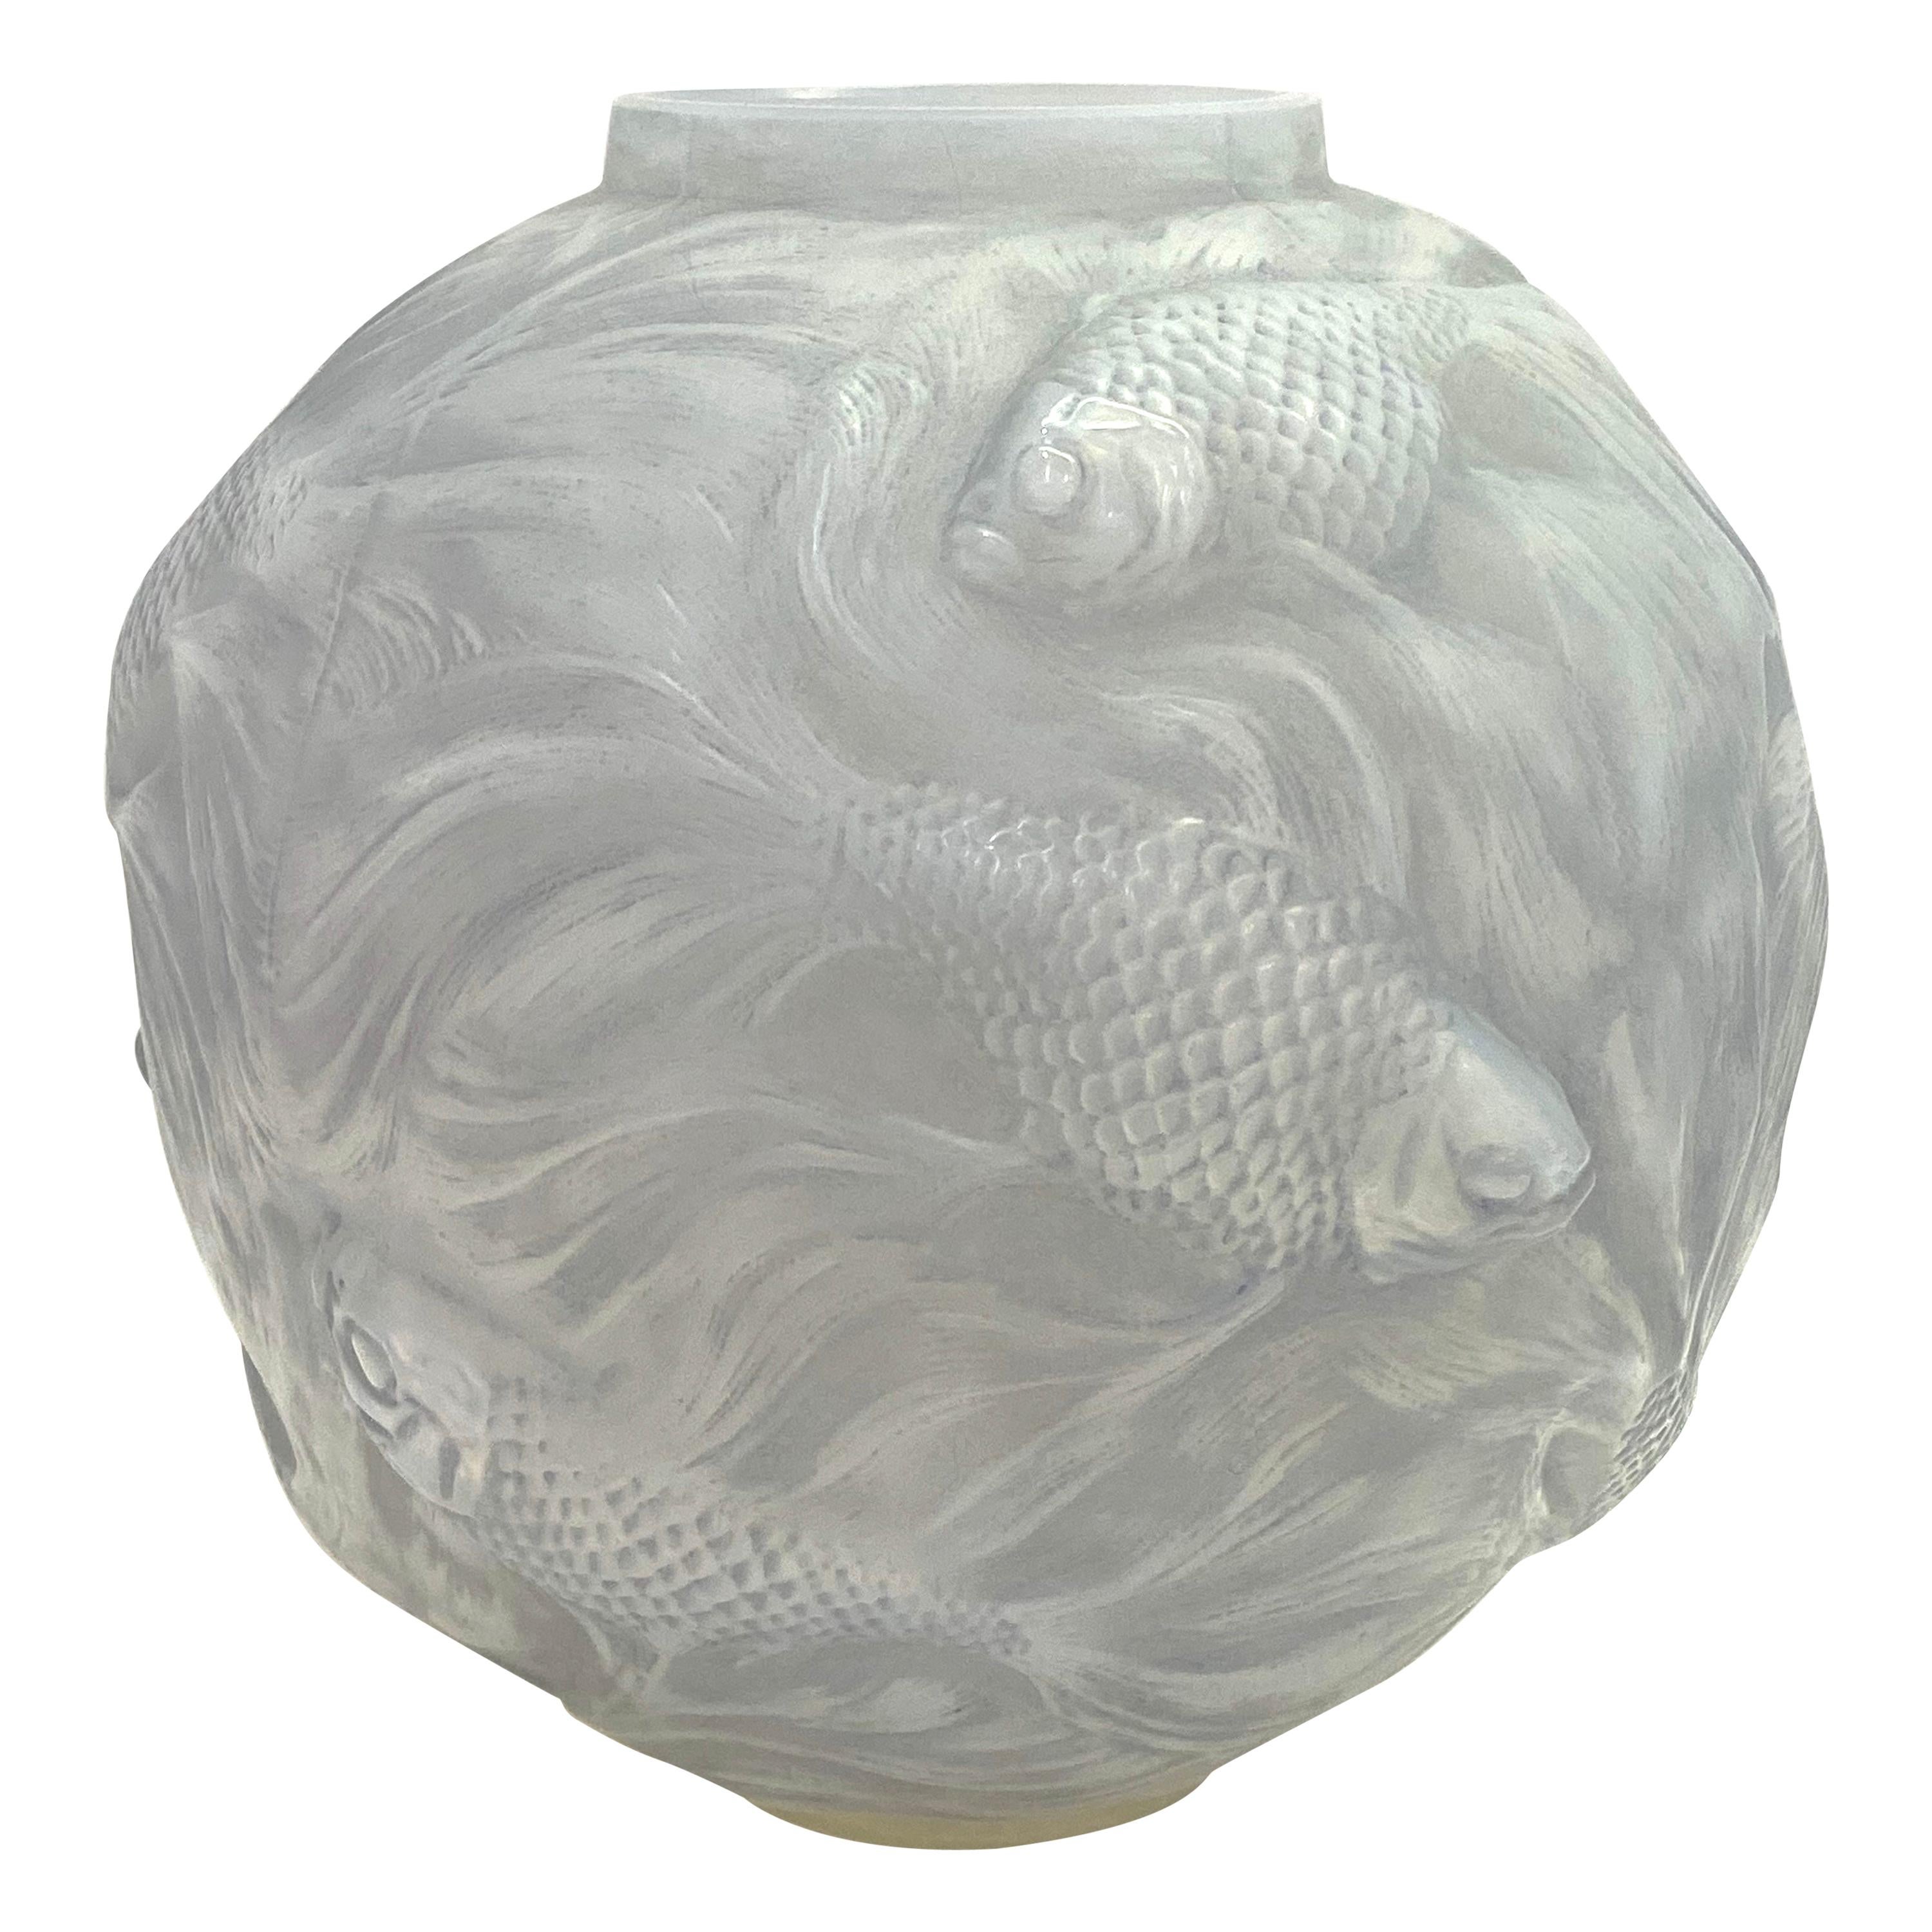 1924 Rene Lalique Formose Vase in Double Cased Opalescent Glass with Grey Stain